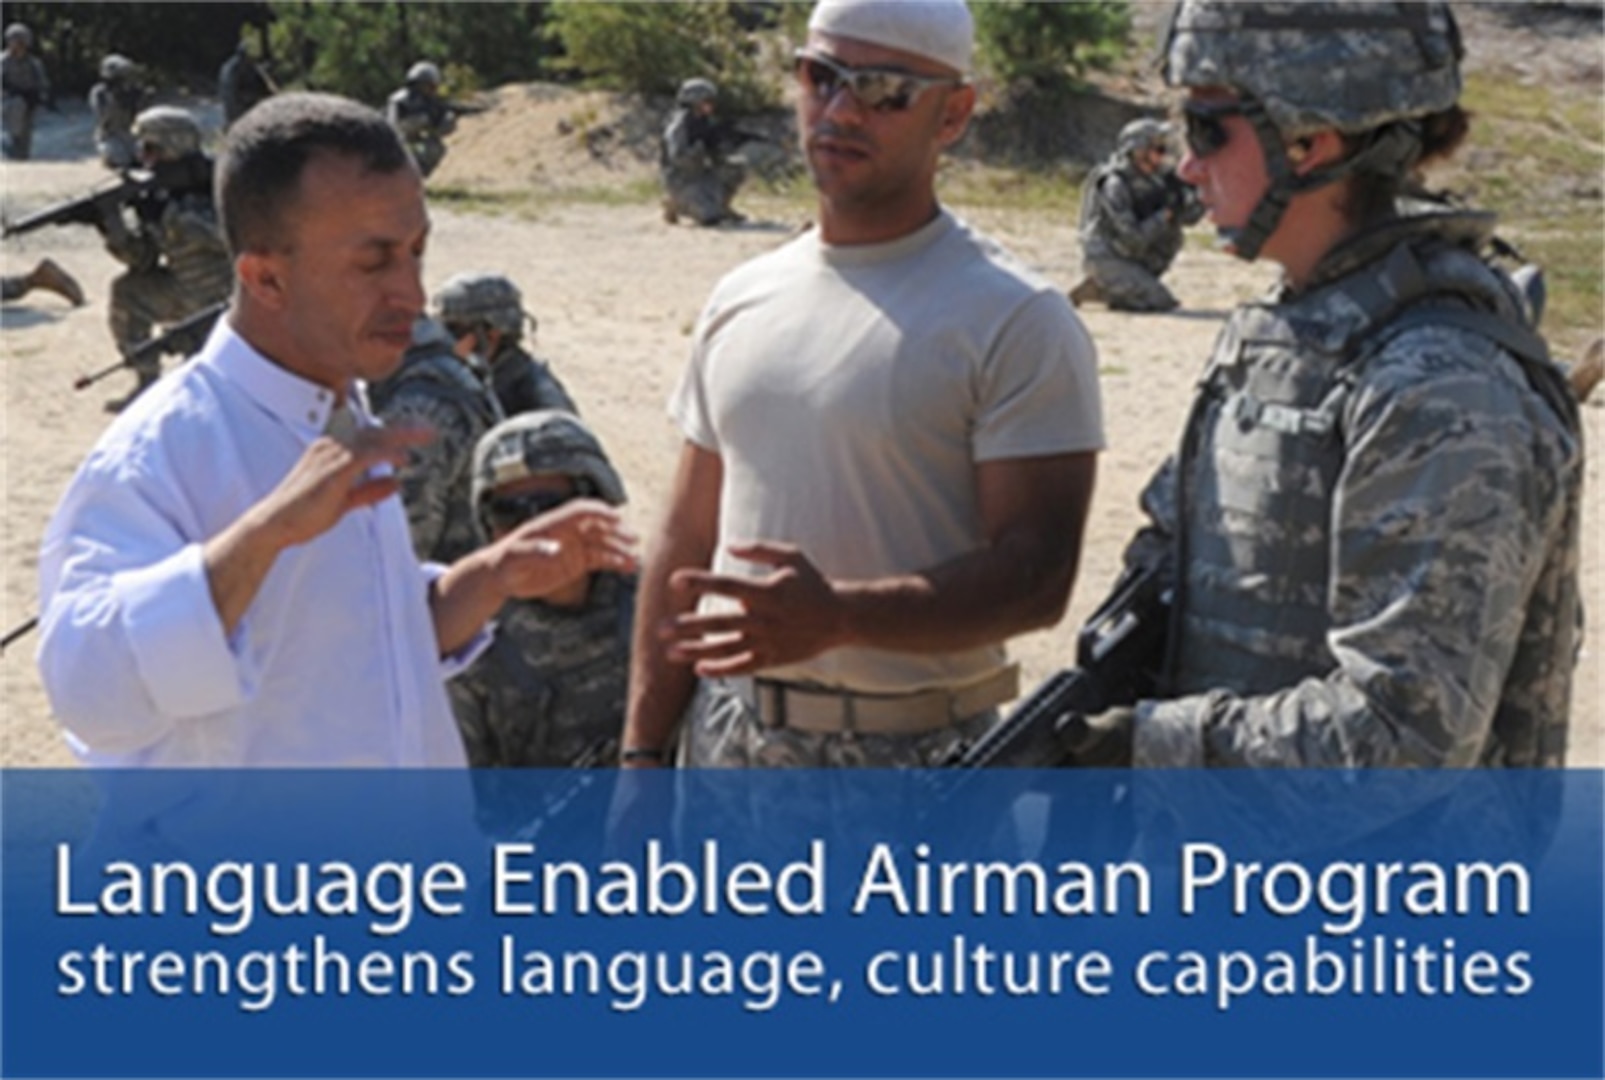 LEAP is a career-spanning program aimed to sustain and improve Airmen's language and cultural capabilities. Managed by the Air Force Culture and Language Center, the program seeks to develop cross-culturally competent leaders who can meet Air Force global mission requirements.